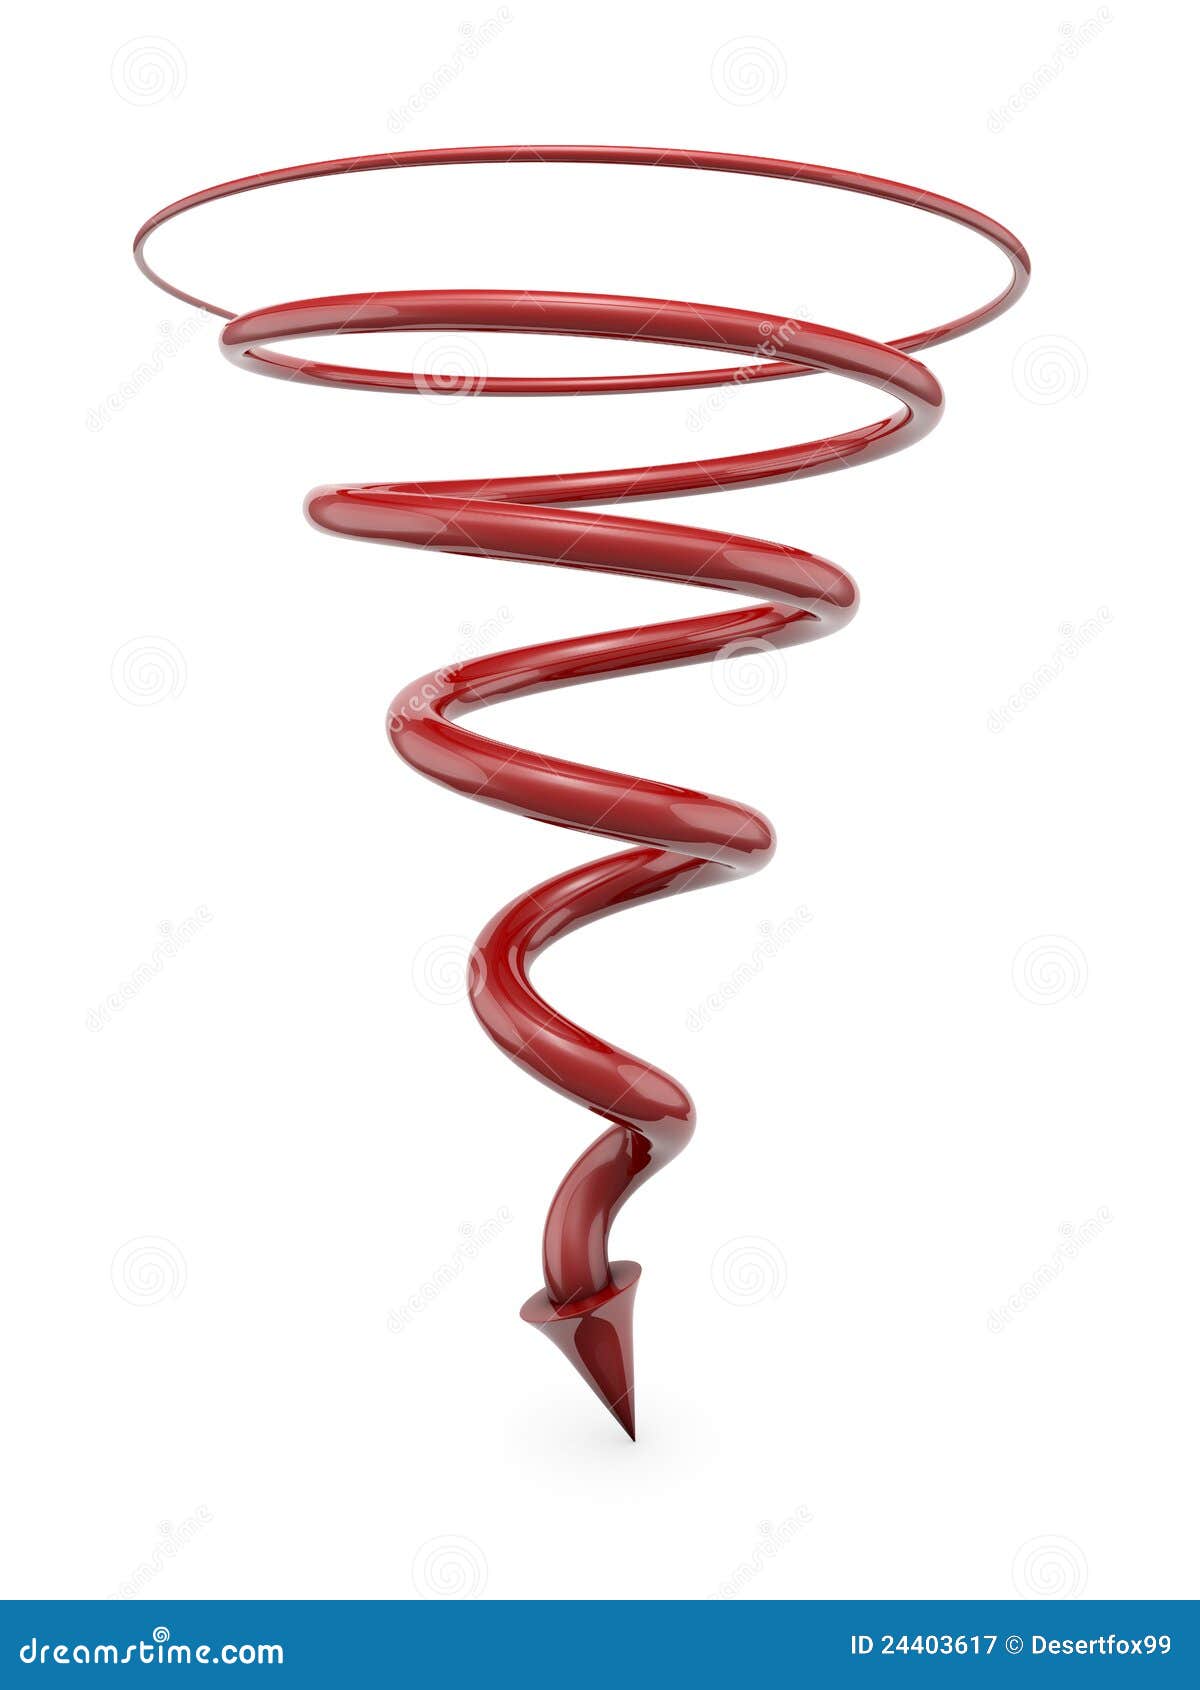 red spiral line with arrow